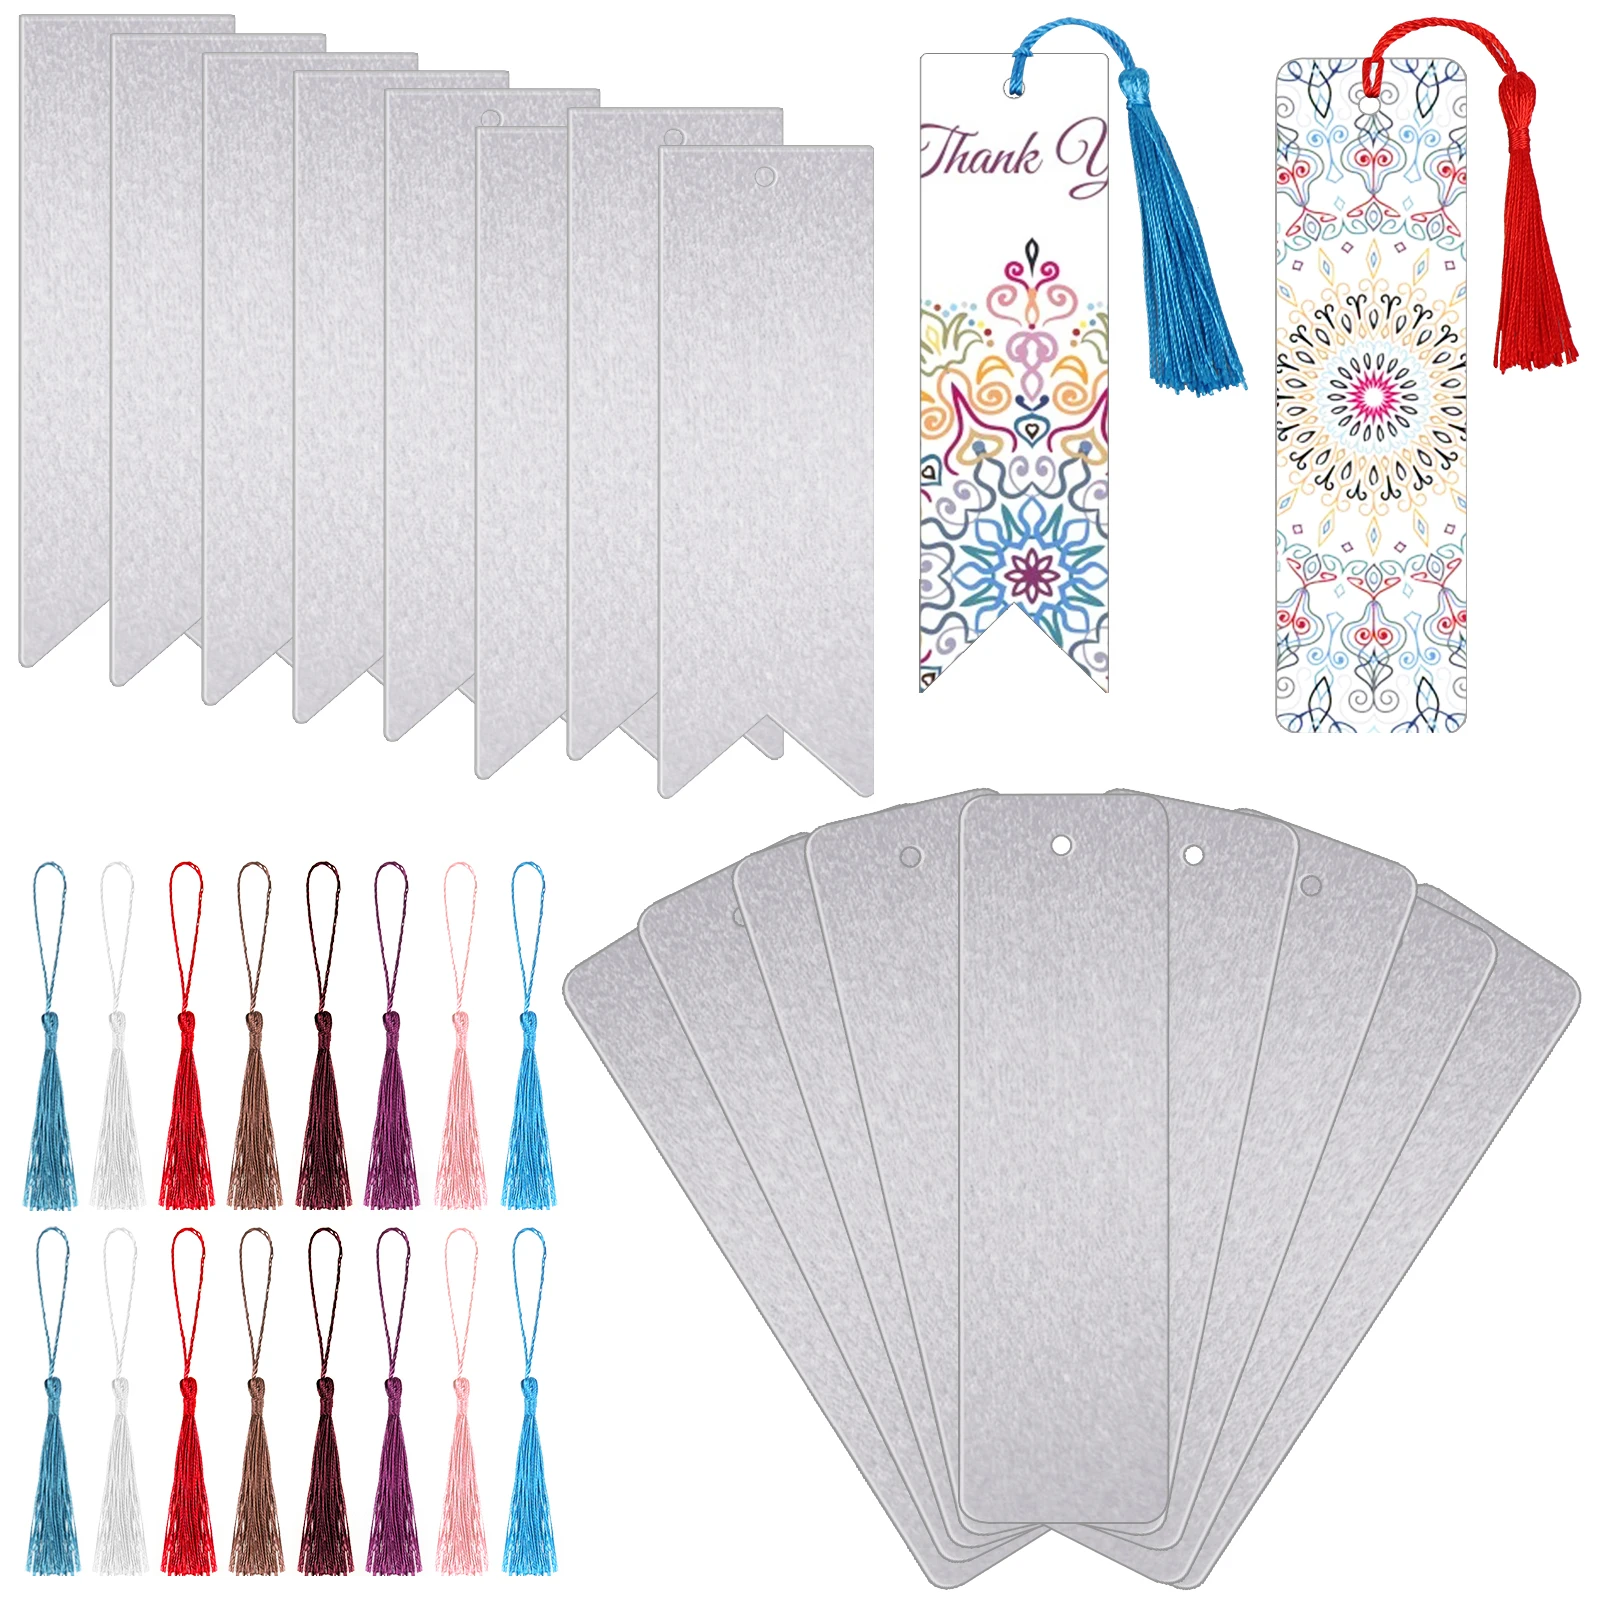  Sublimation Blank Bookmark Heat Transfer Metal Aluminum DIY  Bookmark with Hole and Colorful Tassels for Crafts, Birthday Wedding,  Tassels Blank Bookmarks, Single-Sided Printing (30 Pieces) : Office Products